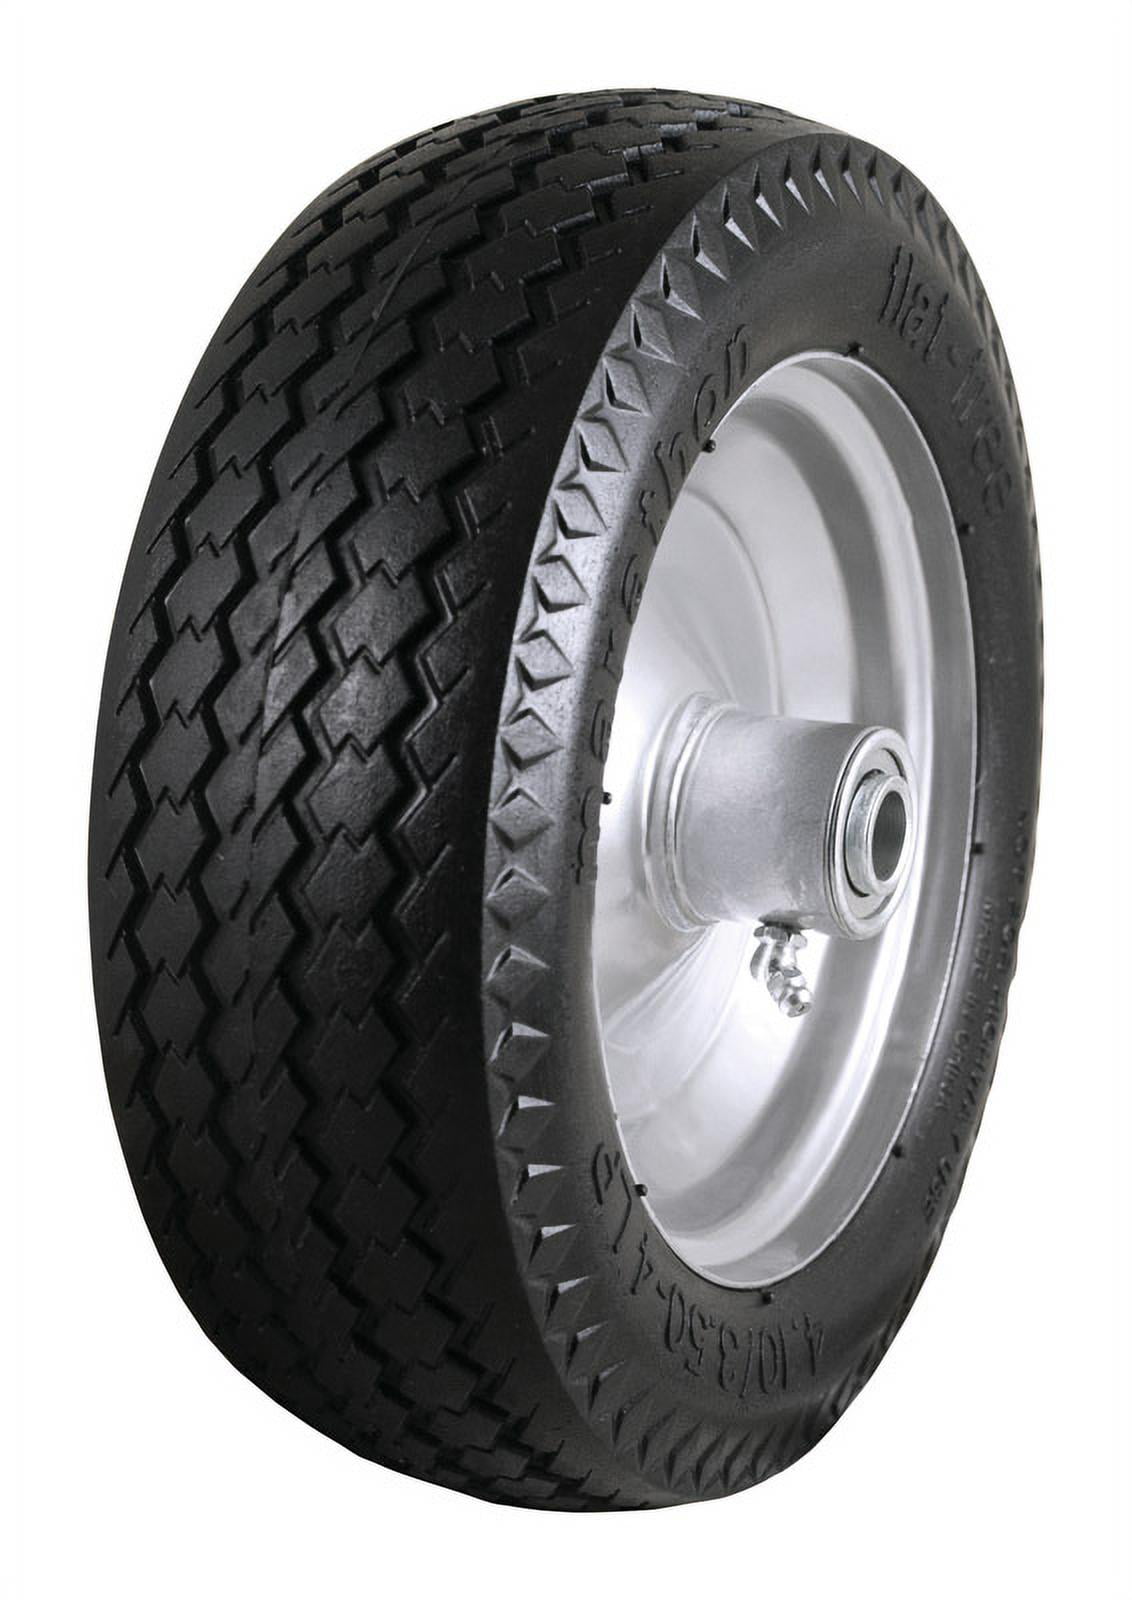 Details about   2 NEW Residential Flatfree 2.80/2.50-4 HandTruck etc Tires-Offset Hub 2.25-4" 